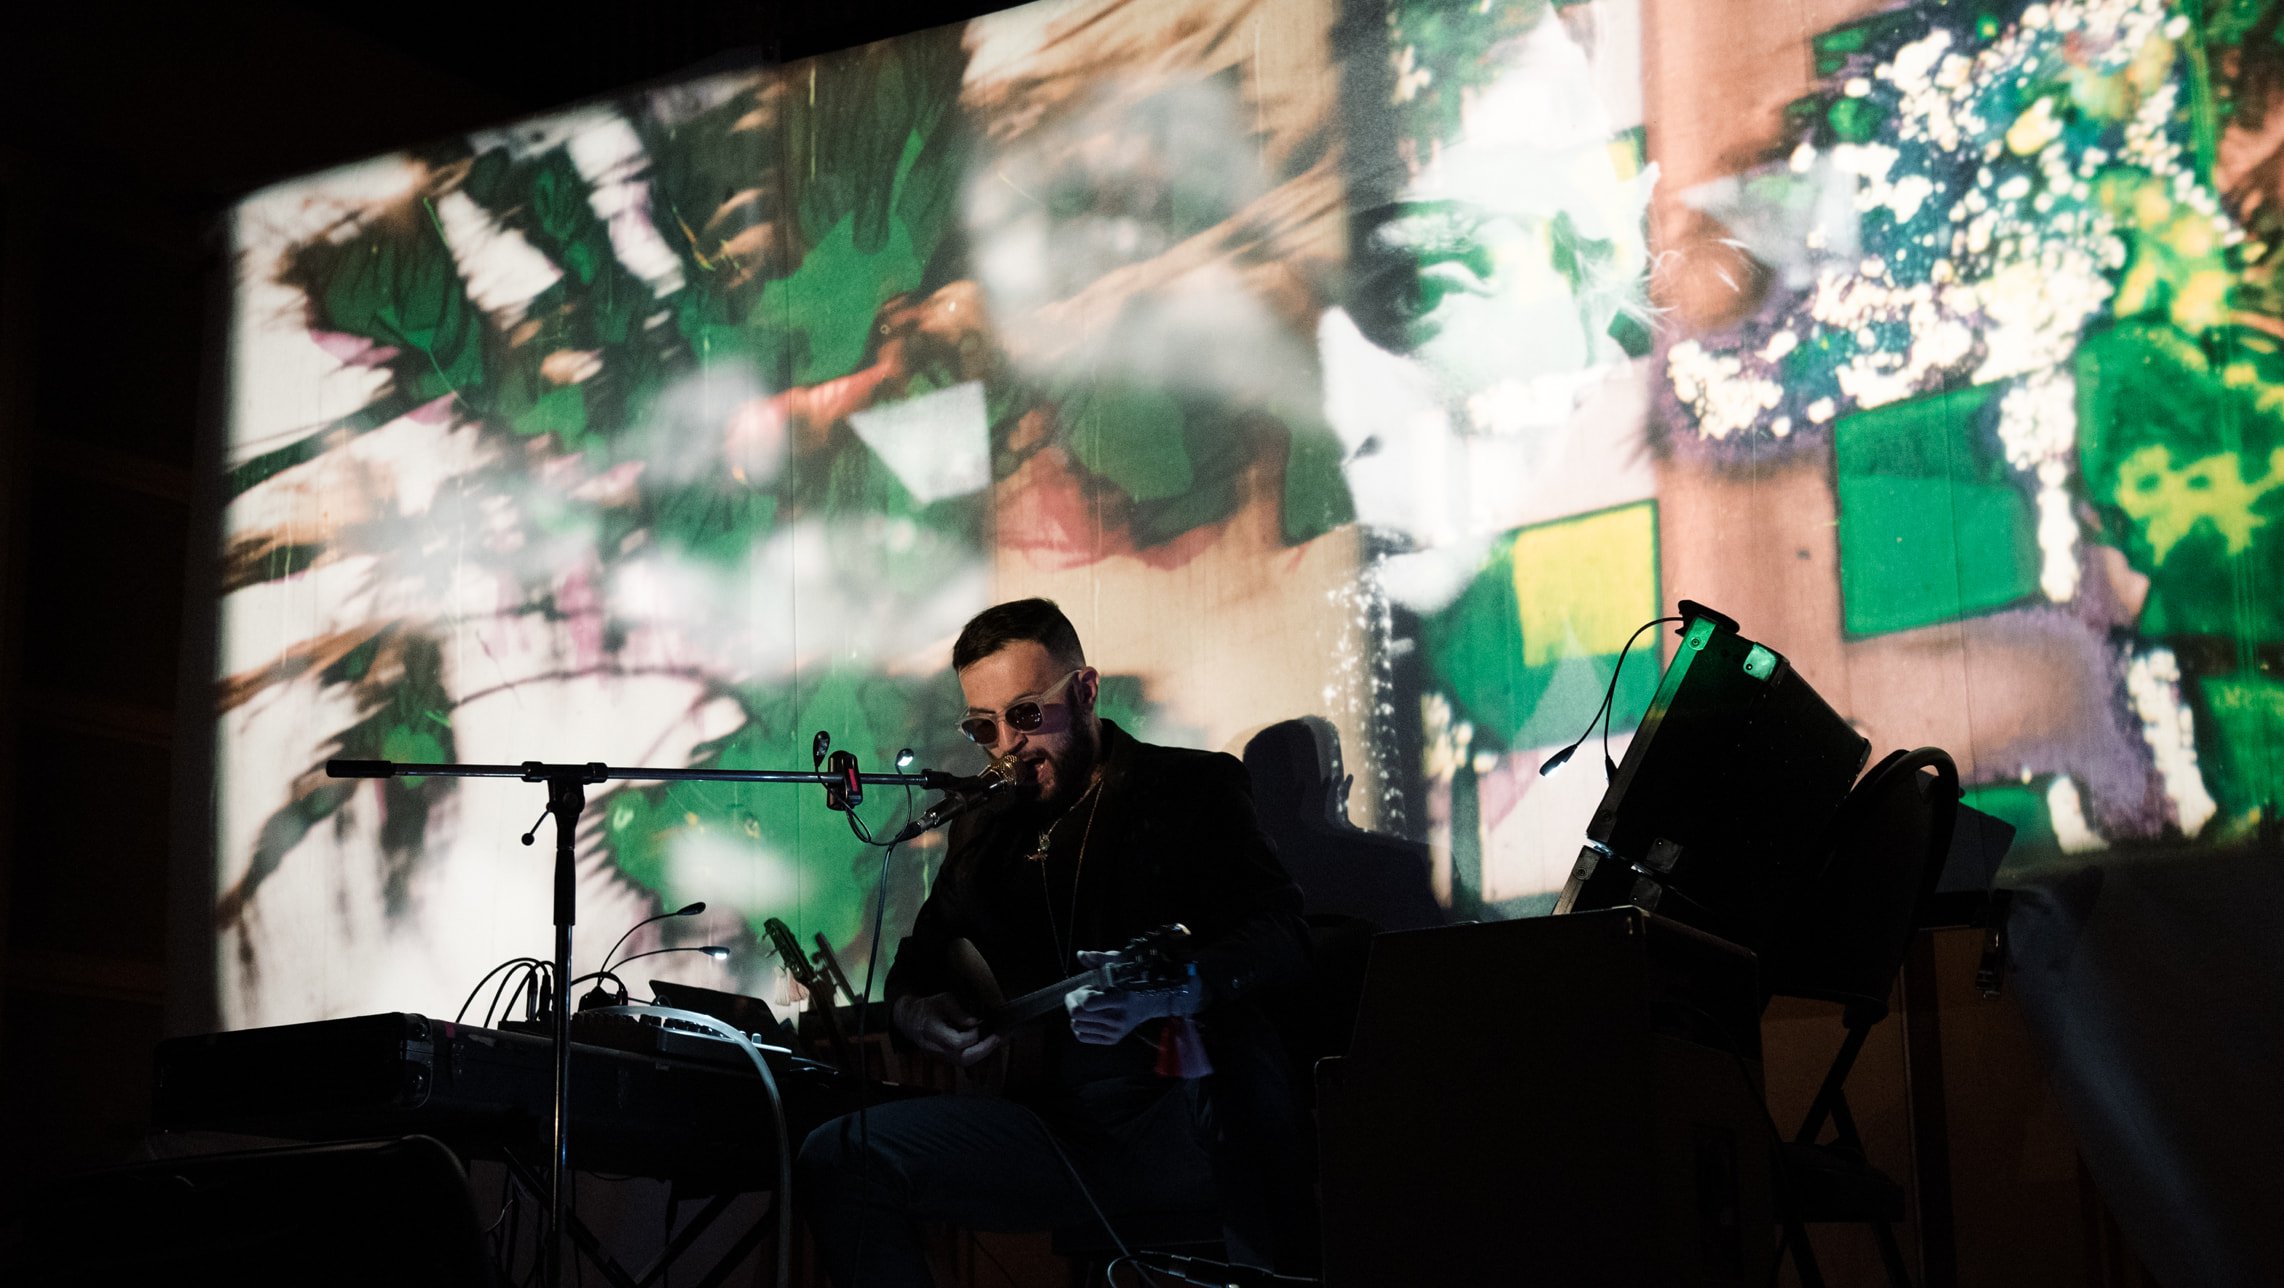 A musician plays an instrument in front of a screen with projected image